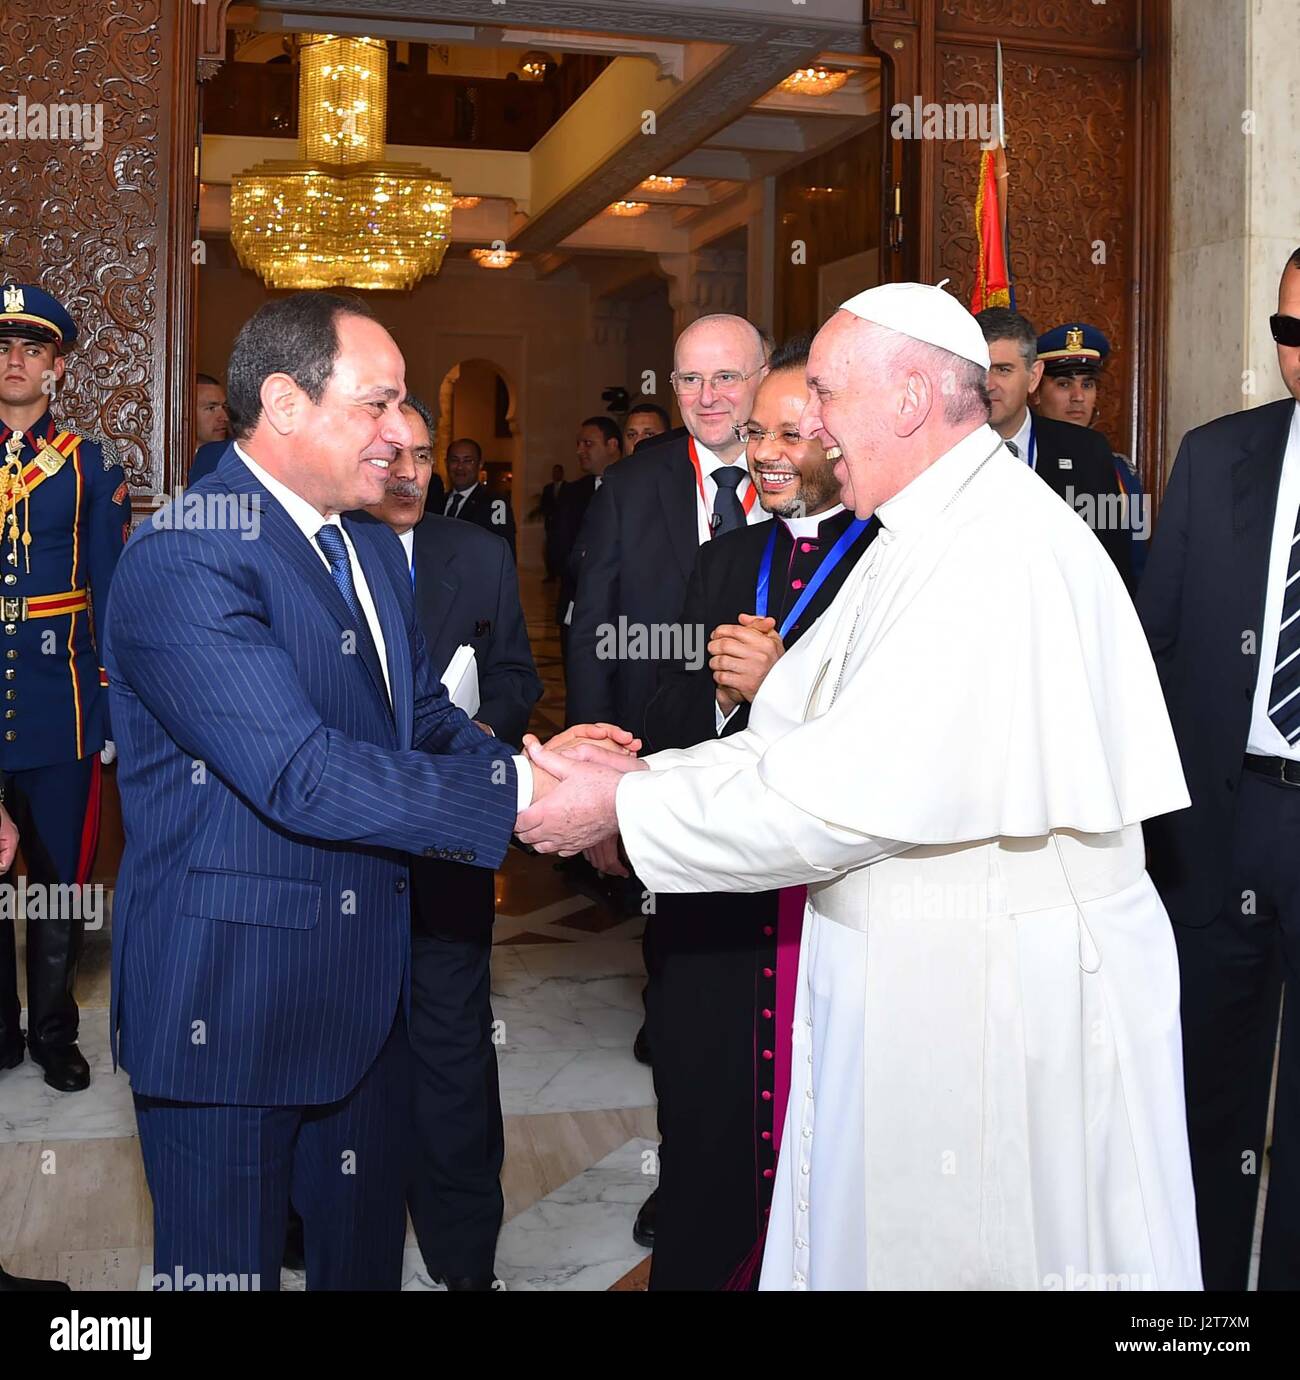 28 April 2017 - Cairo, Egypt - Pope Francis visits Egypt hosted by Egyptian President Abdel Fatah Al Sisi, where he gave speeches for peace in the Middle East and held a public mass in an Air Force Stadium.  (Presidency Pool Photo) Stock Photo